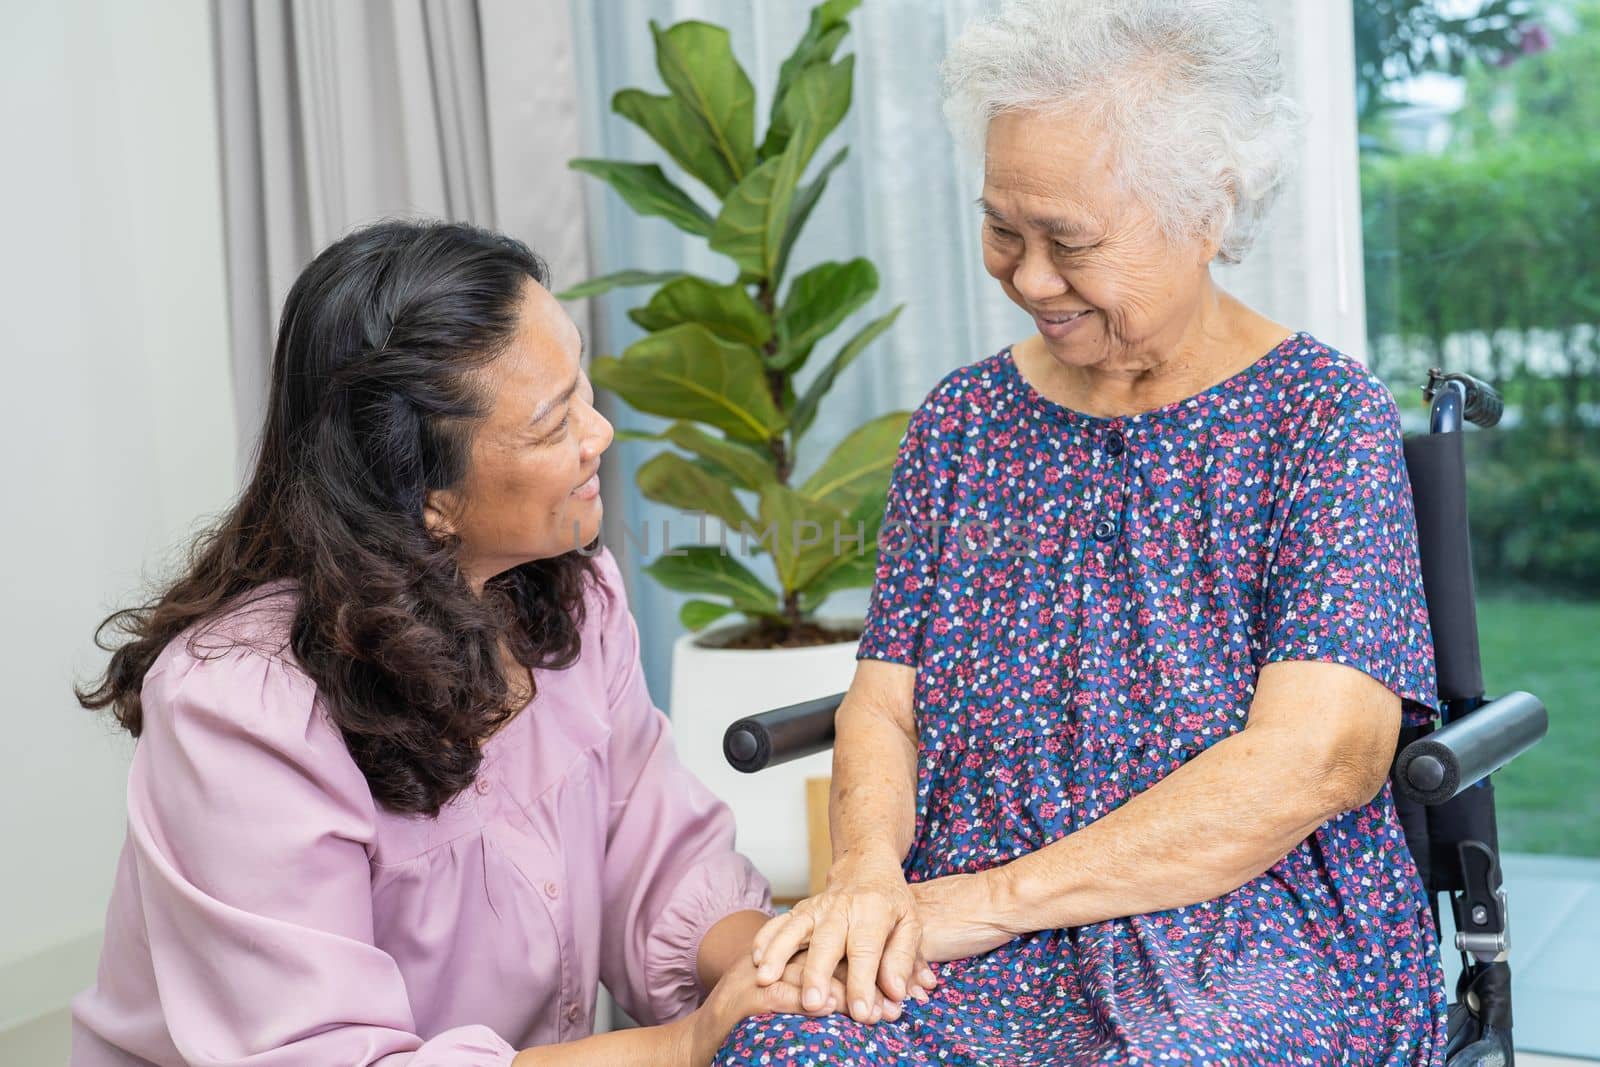 Caregiver help and care Asian senior or elderly old lady woman patient sitting on wheelchair at home.